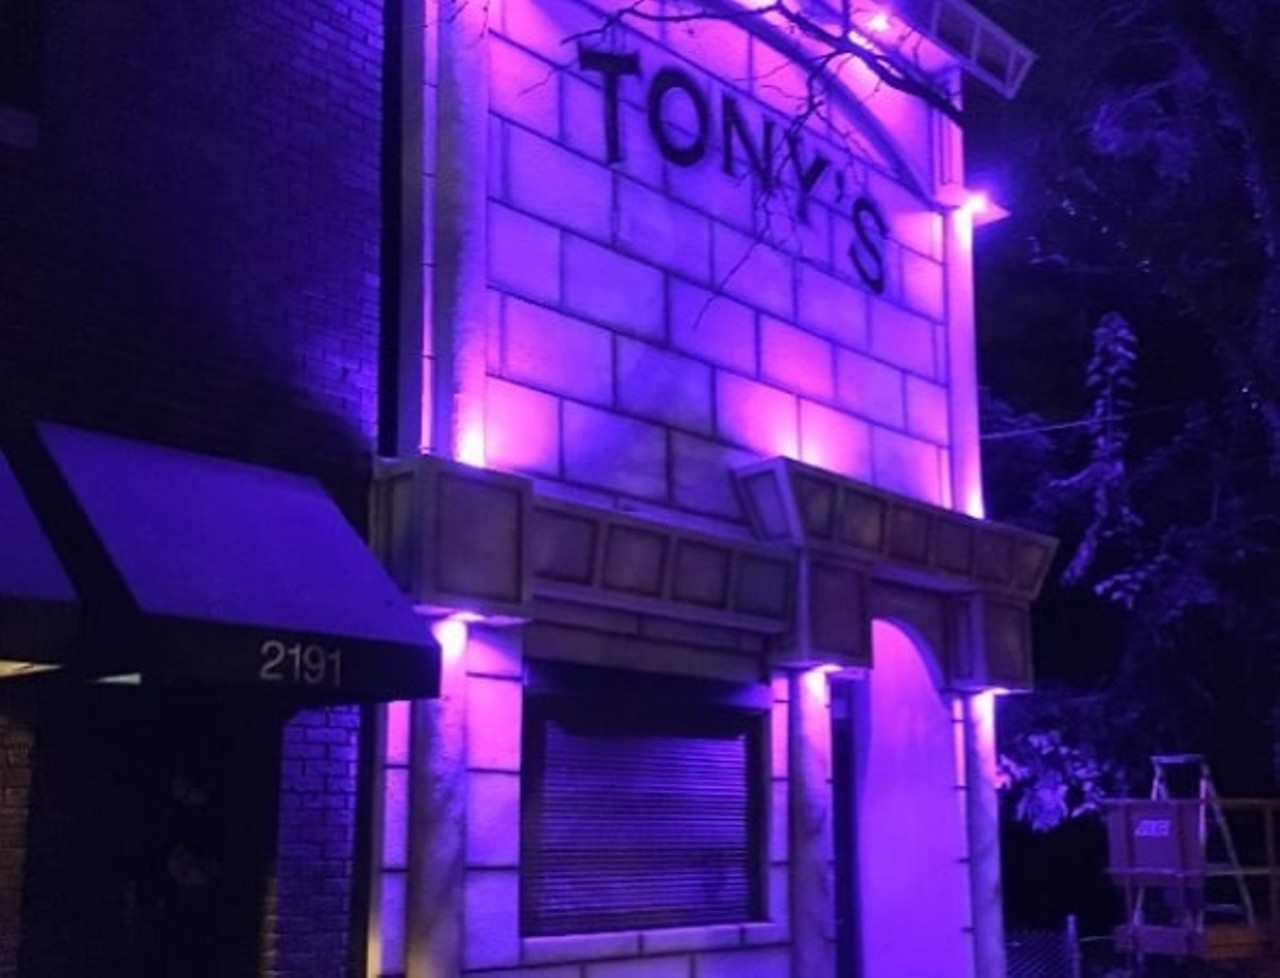 Tony&#146;s Southside 
2193 Professor Ave., 216-771-0515
Alongside its killer pizza, Tony&#146;s also serves up authentic Greek dishes. They&#146;re only open Friday and Saturday night, from 7 p.m. to 1 a.m., so reservations are recommended,
Photo via chefmtngoat/Instagram